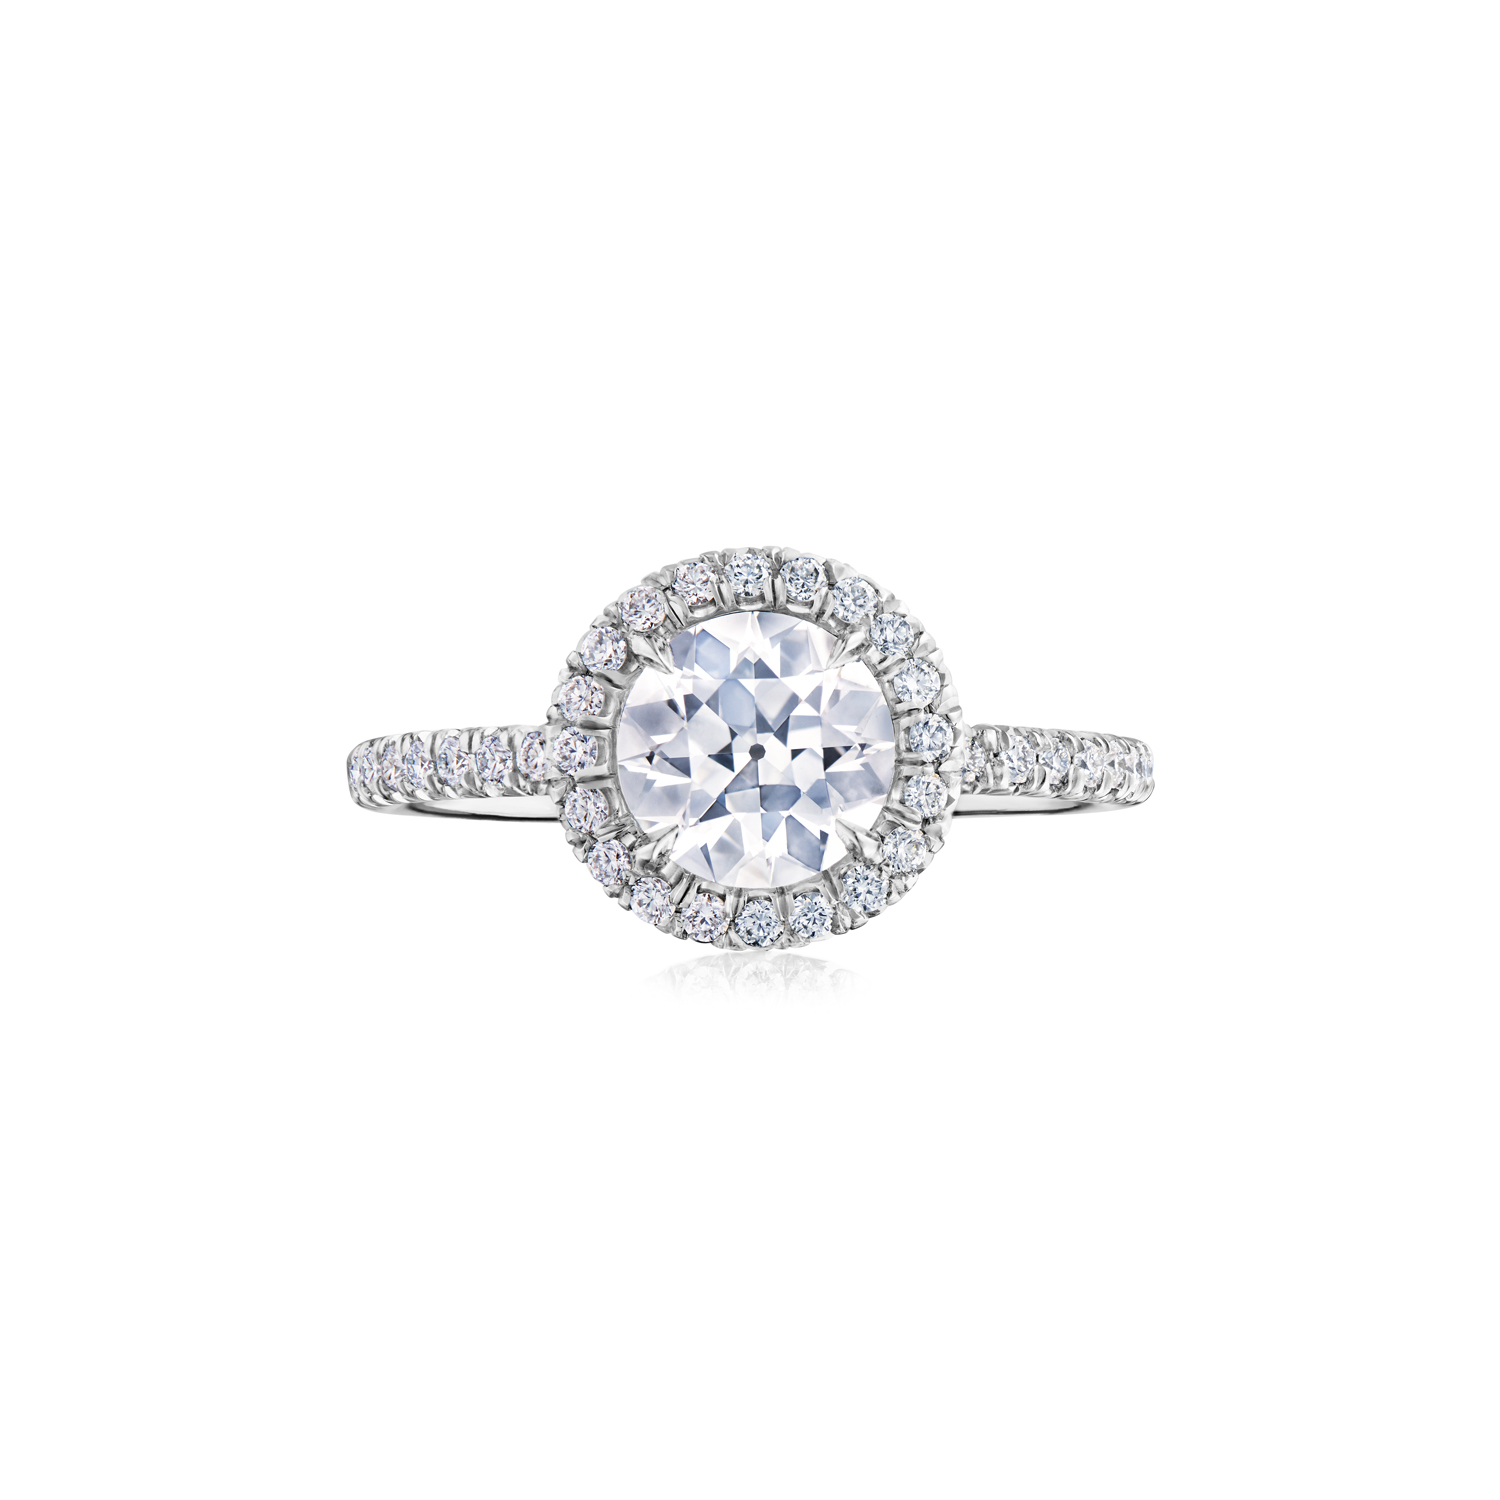 Round Rose Cut Diamond Engagement Ring with a Pave Diamond Halo in Platinum, Style F-1019FLRCA-0-DIA-PLAT